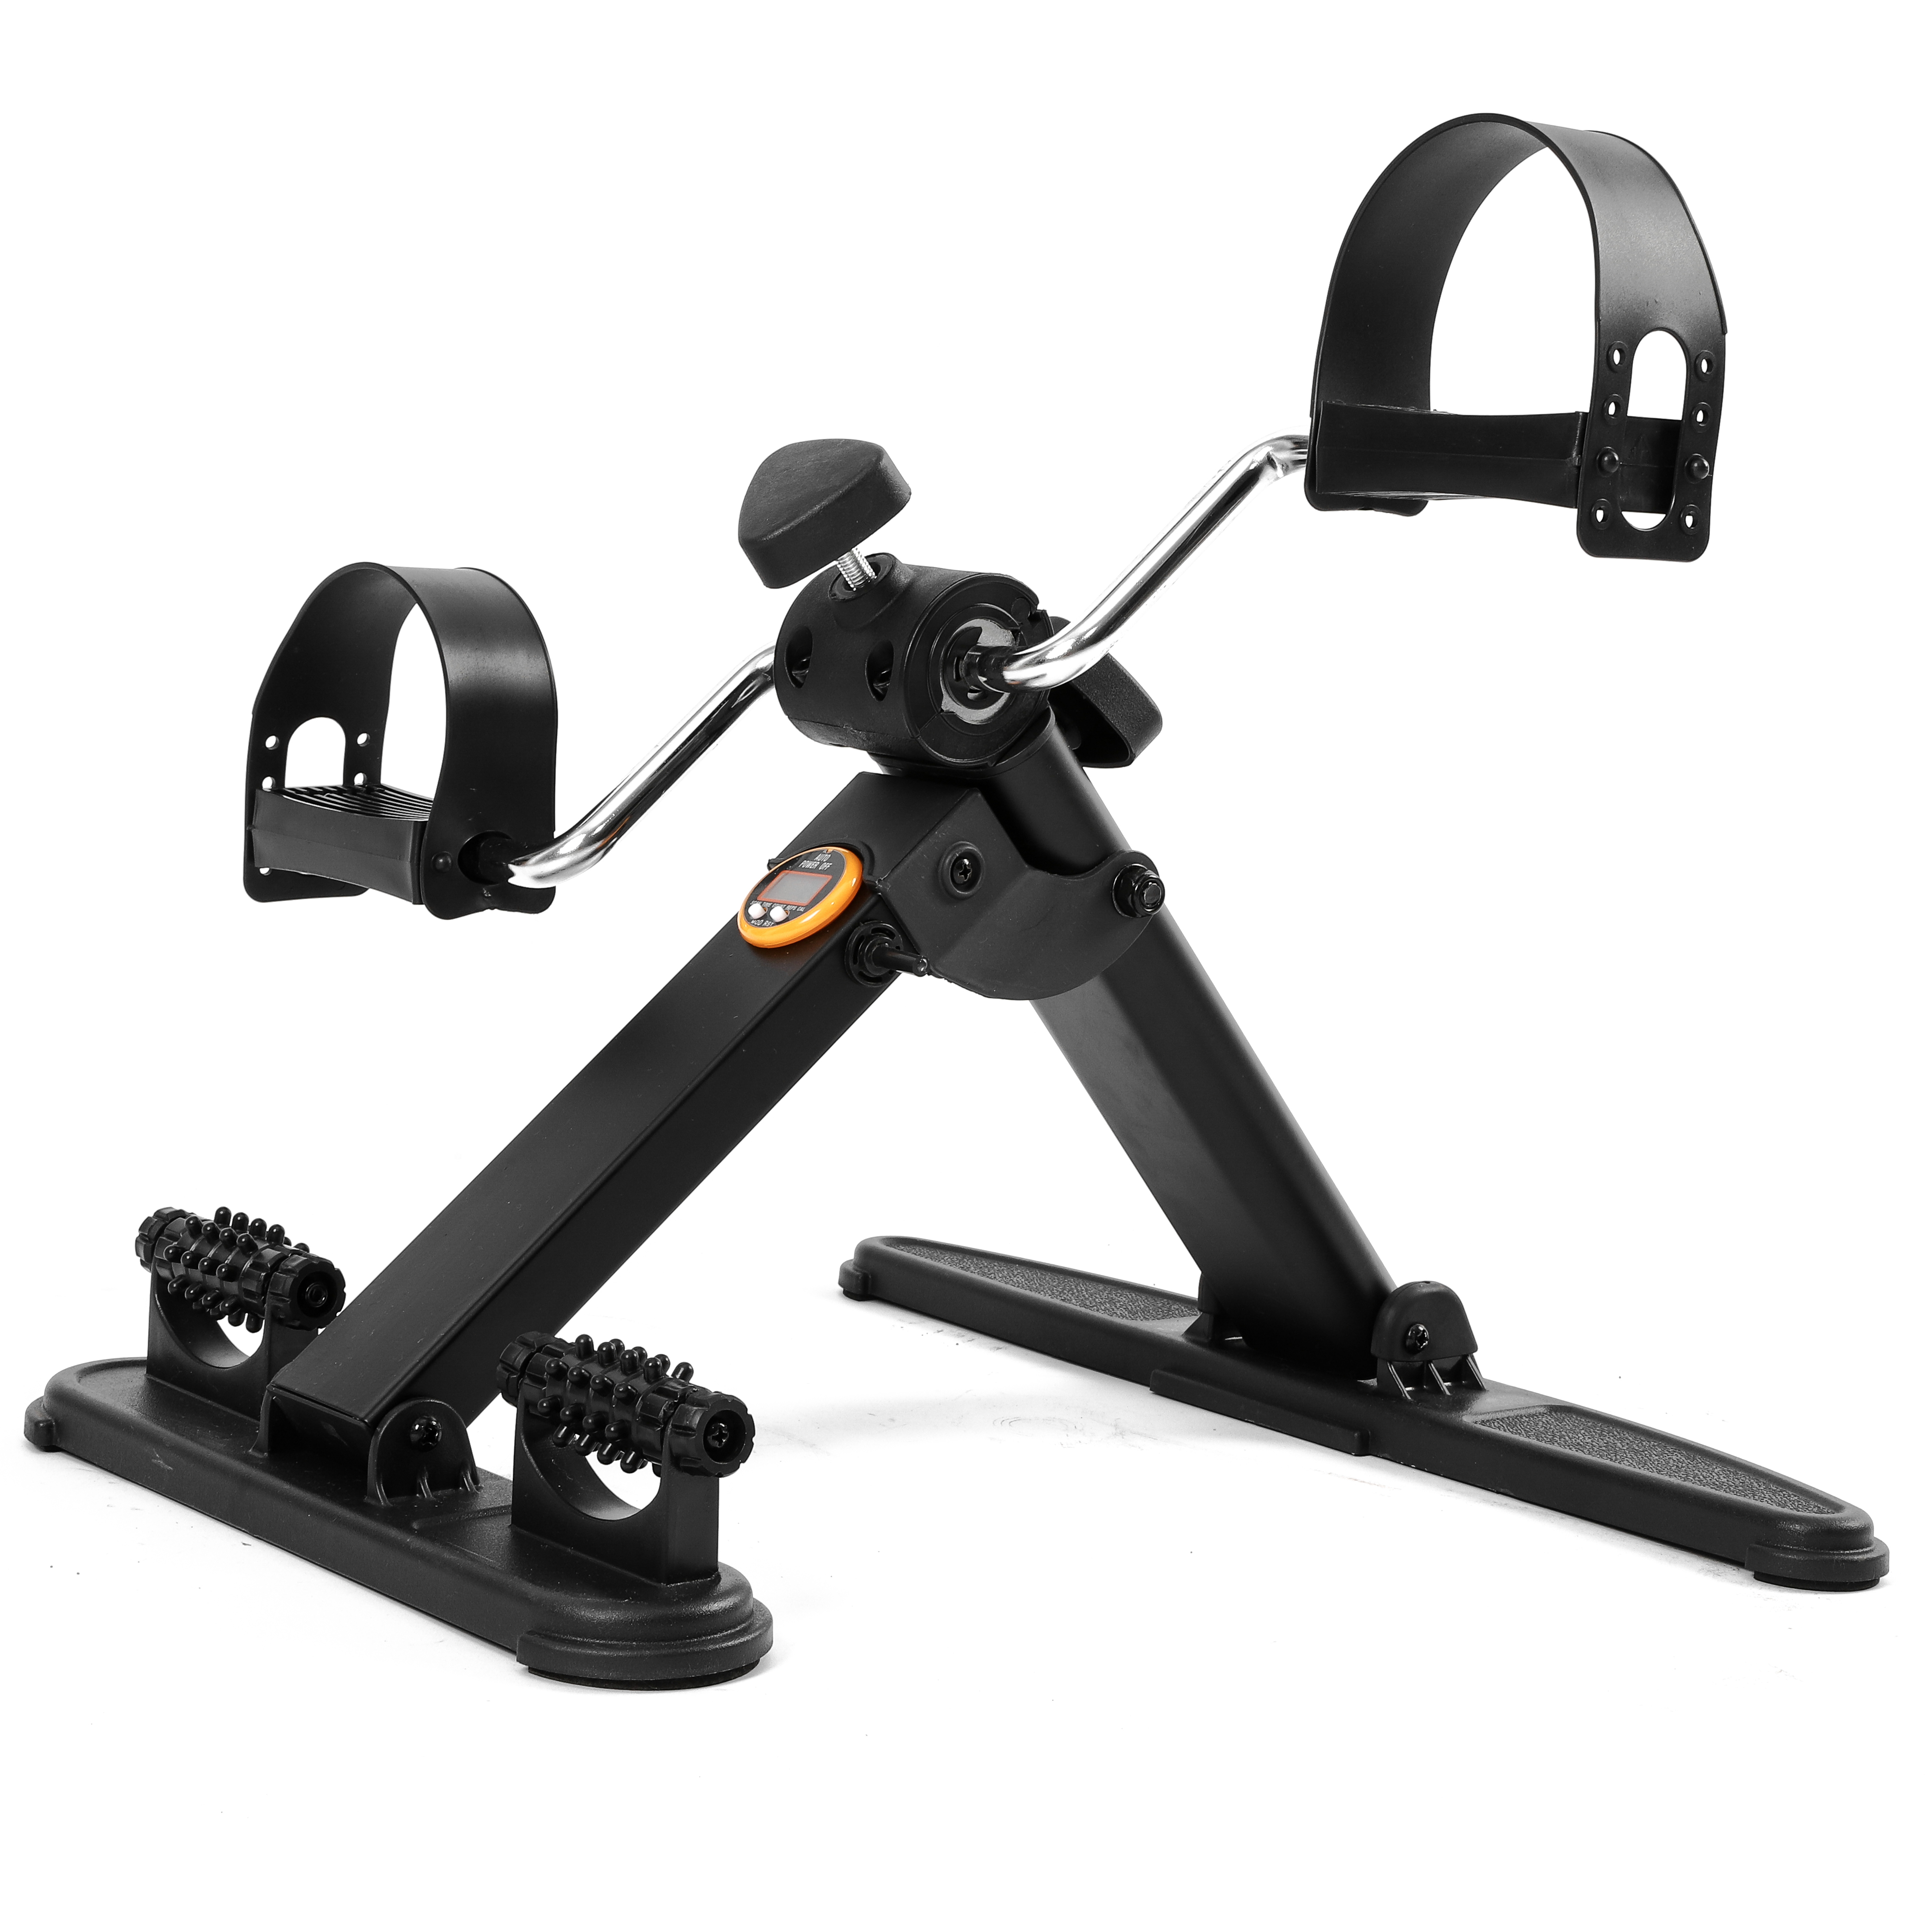 Mini Color And Indoor Gym Indoor Arm Leg Trainer Steel Mini Pedal Cycle Exercise Bike machine